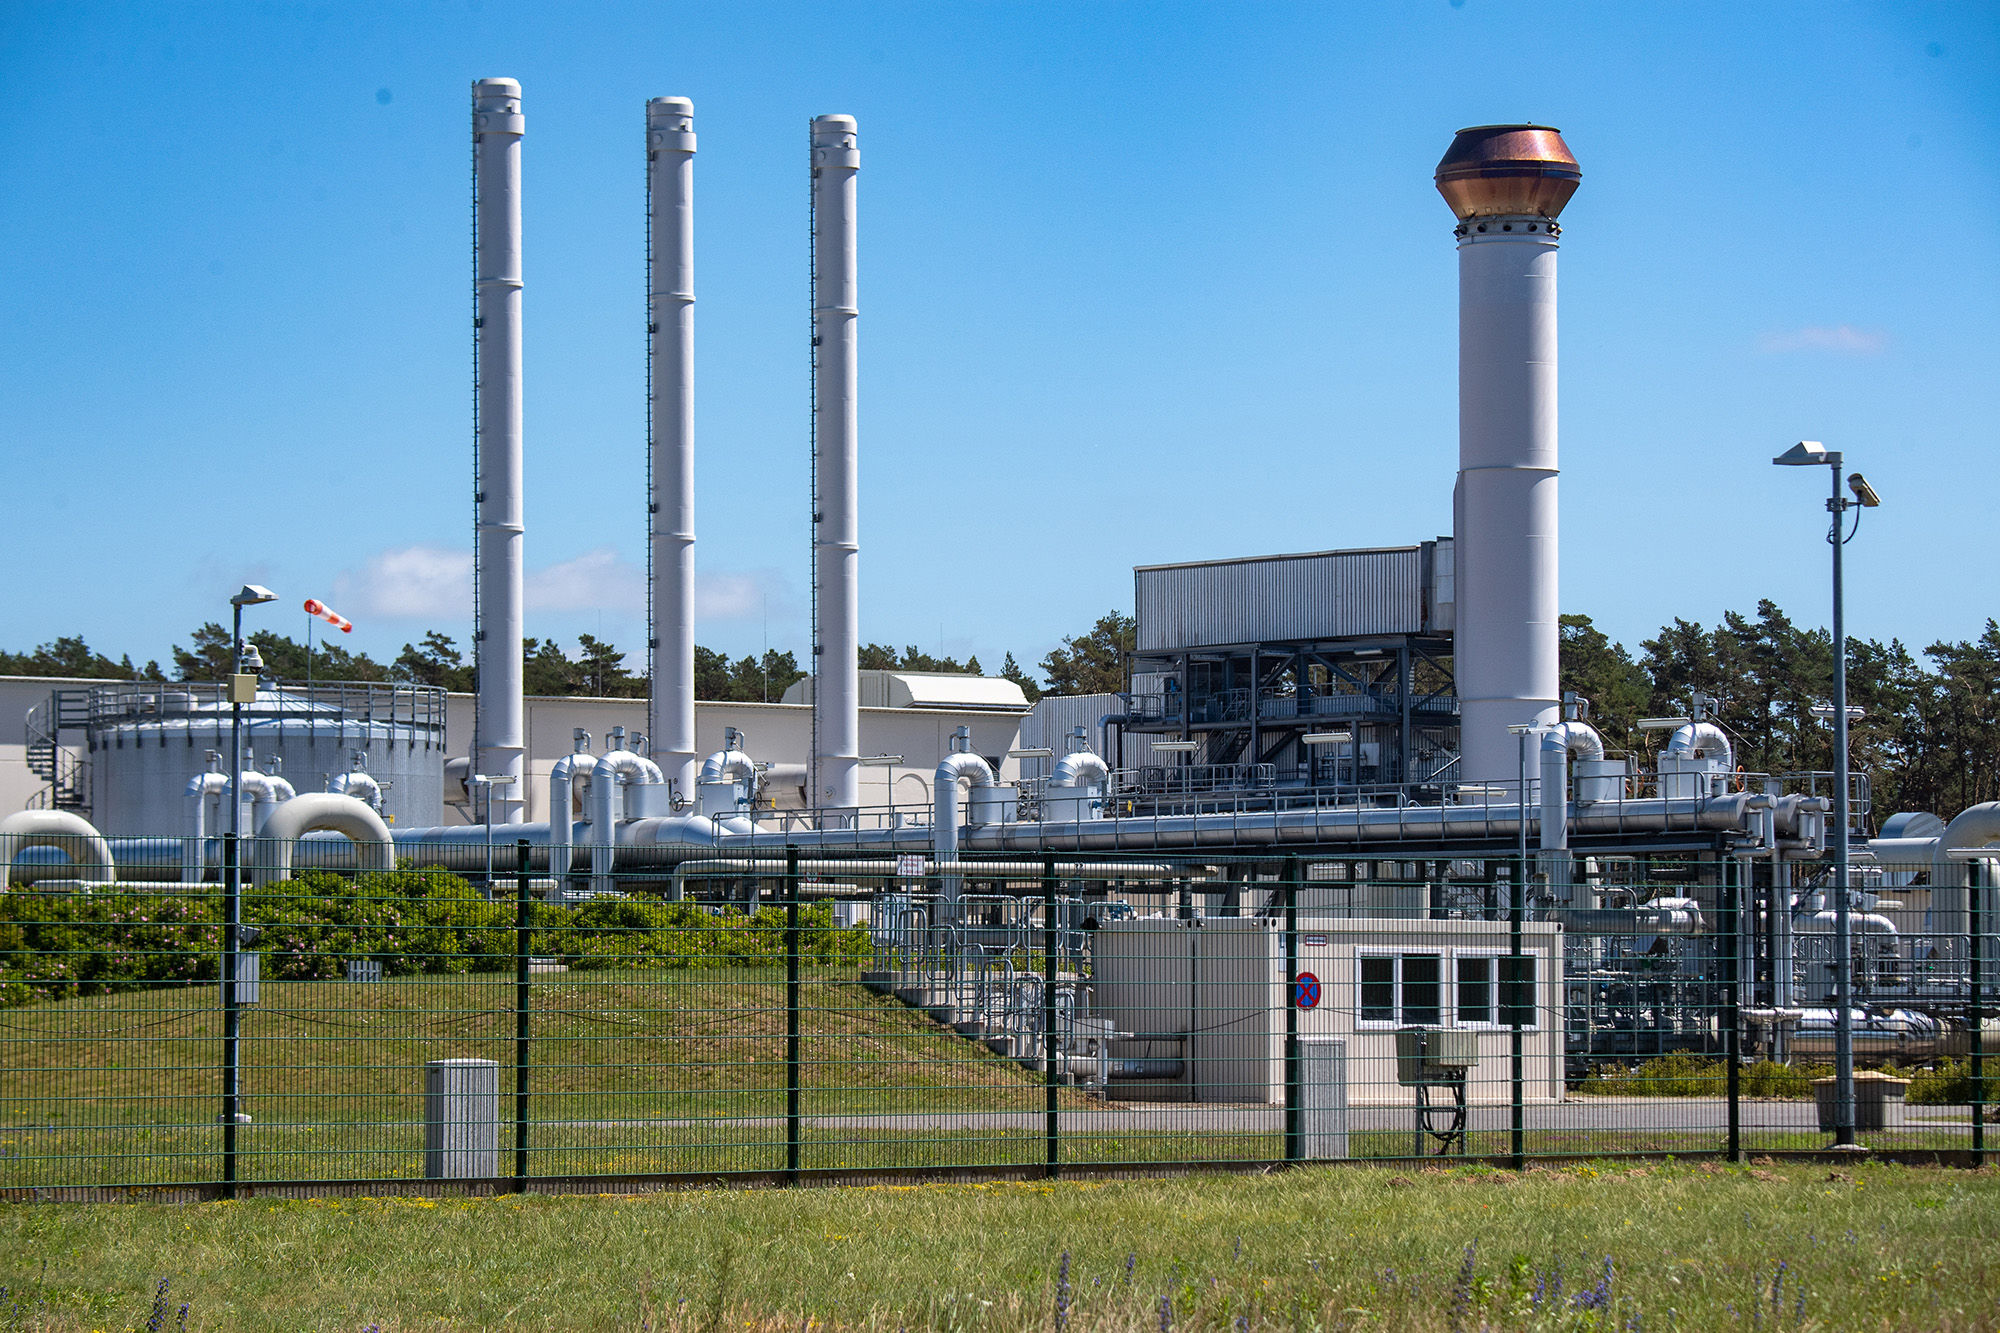 Piping systems and shut-off devices at the gas receiving station of the Nord Stream 1 Baltic Sea gas pipeline in Mecklenburg-West Pomerania, Lubmin, Germany, on June 21